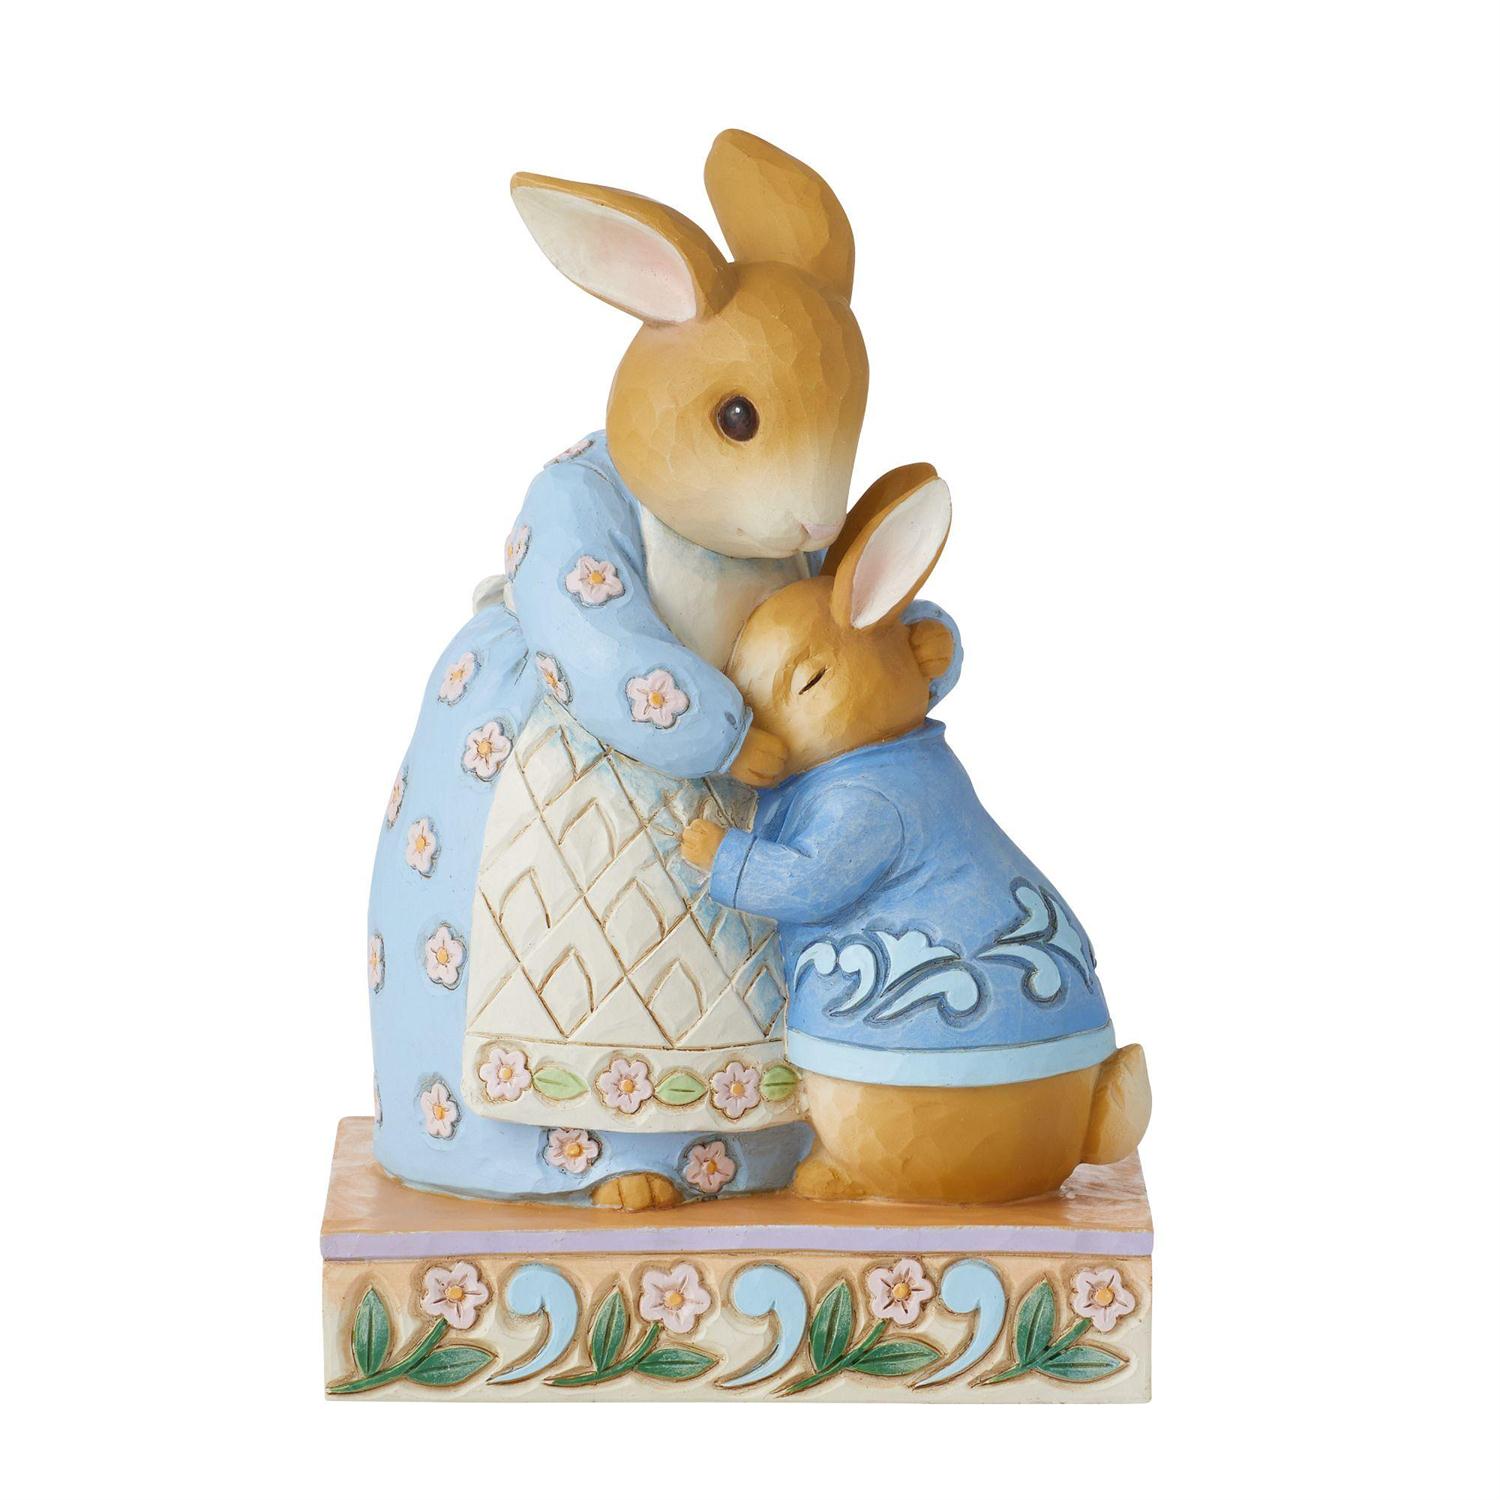 Figurines – Beatrix Potter Gifts by Enesco